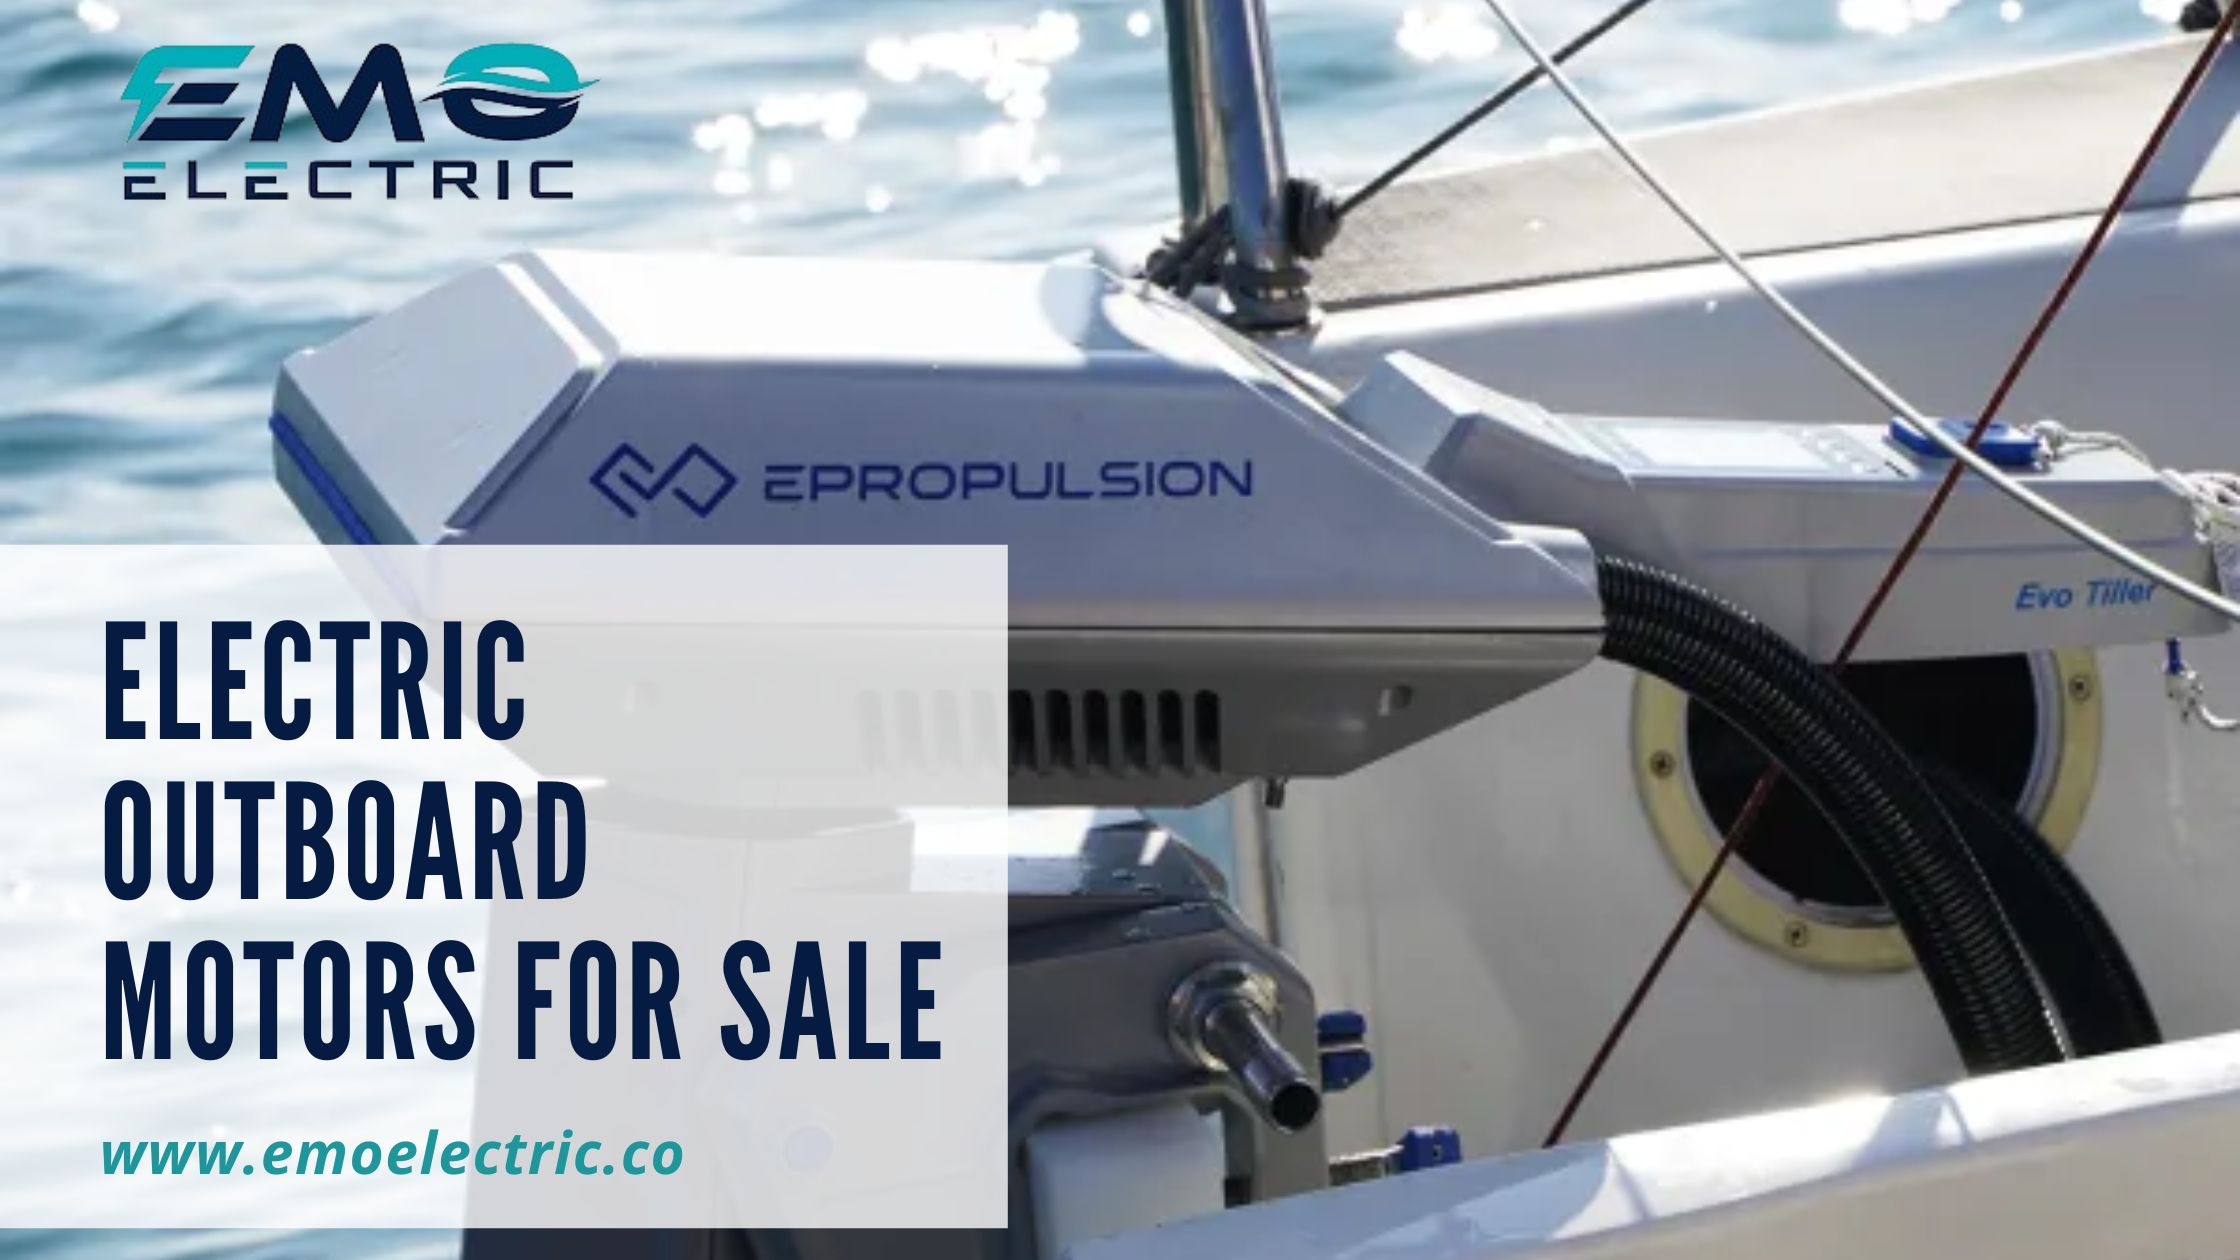 Electronic dwells the future of boating - EMO Electric